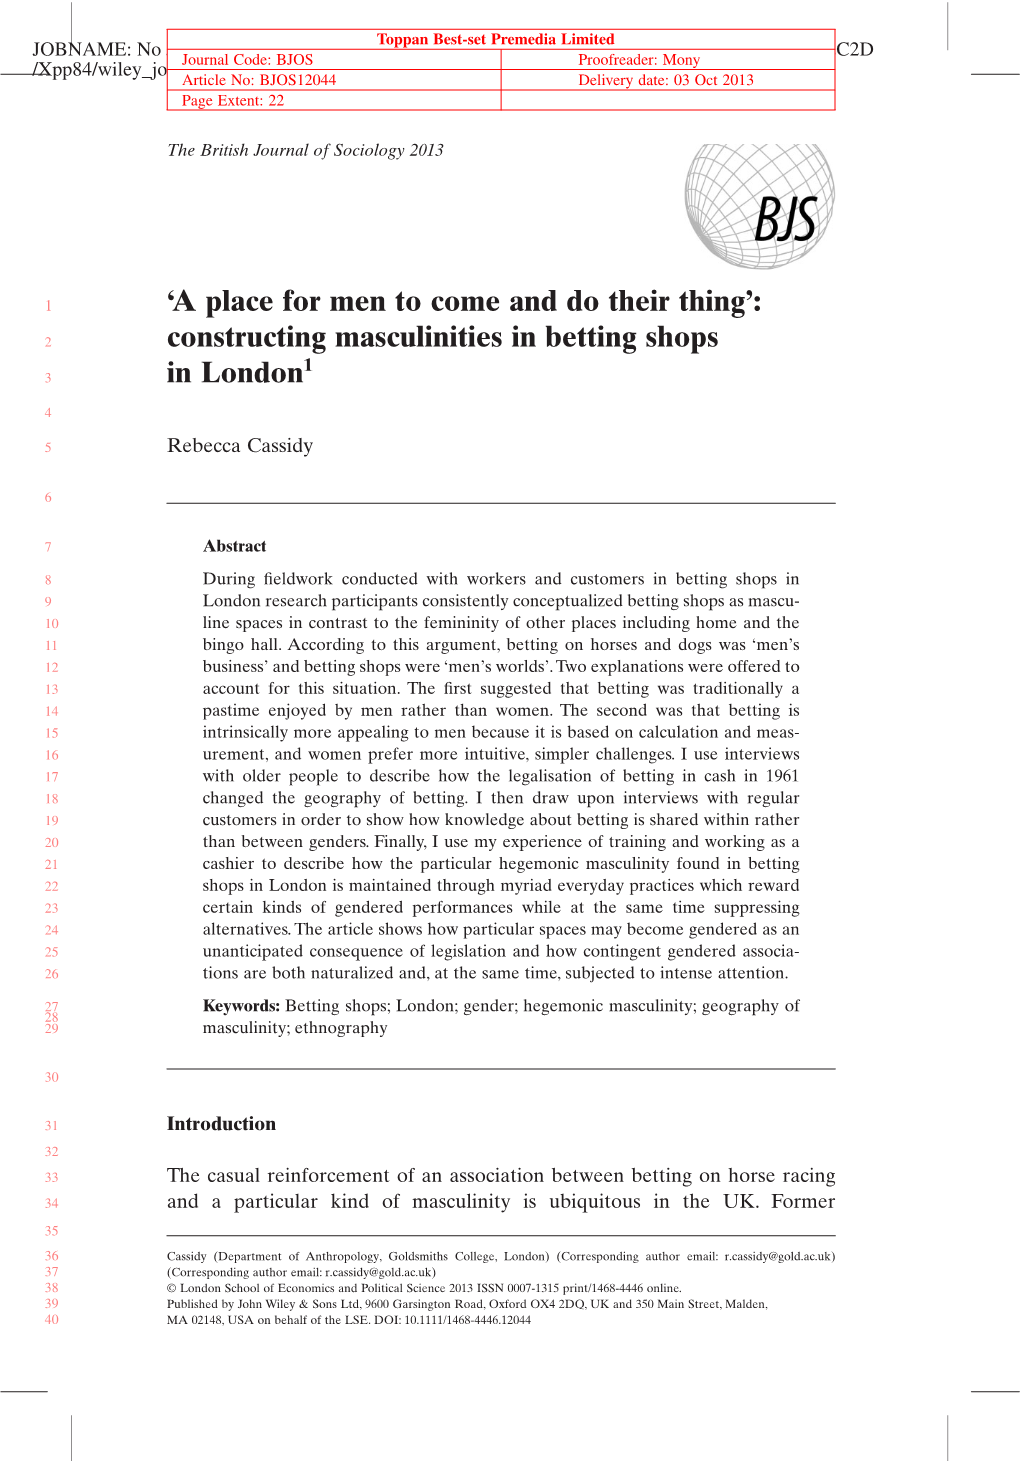 'A Place for Men to Come and Do Their Thing': Constructing Masculinities in Betting Shops in London1